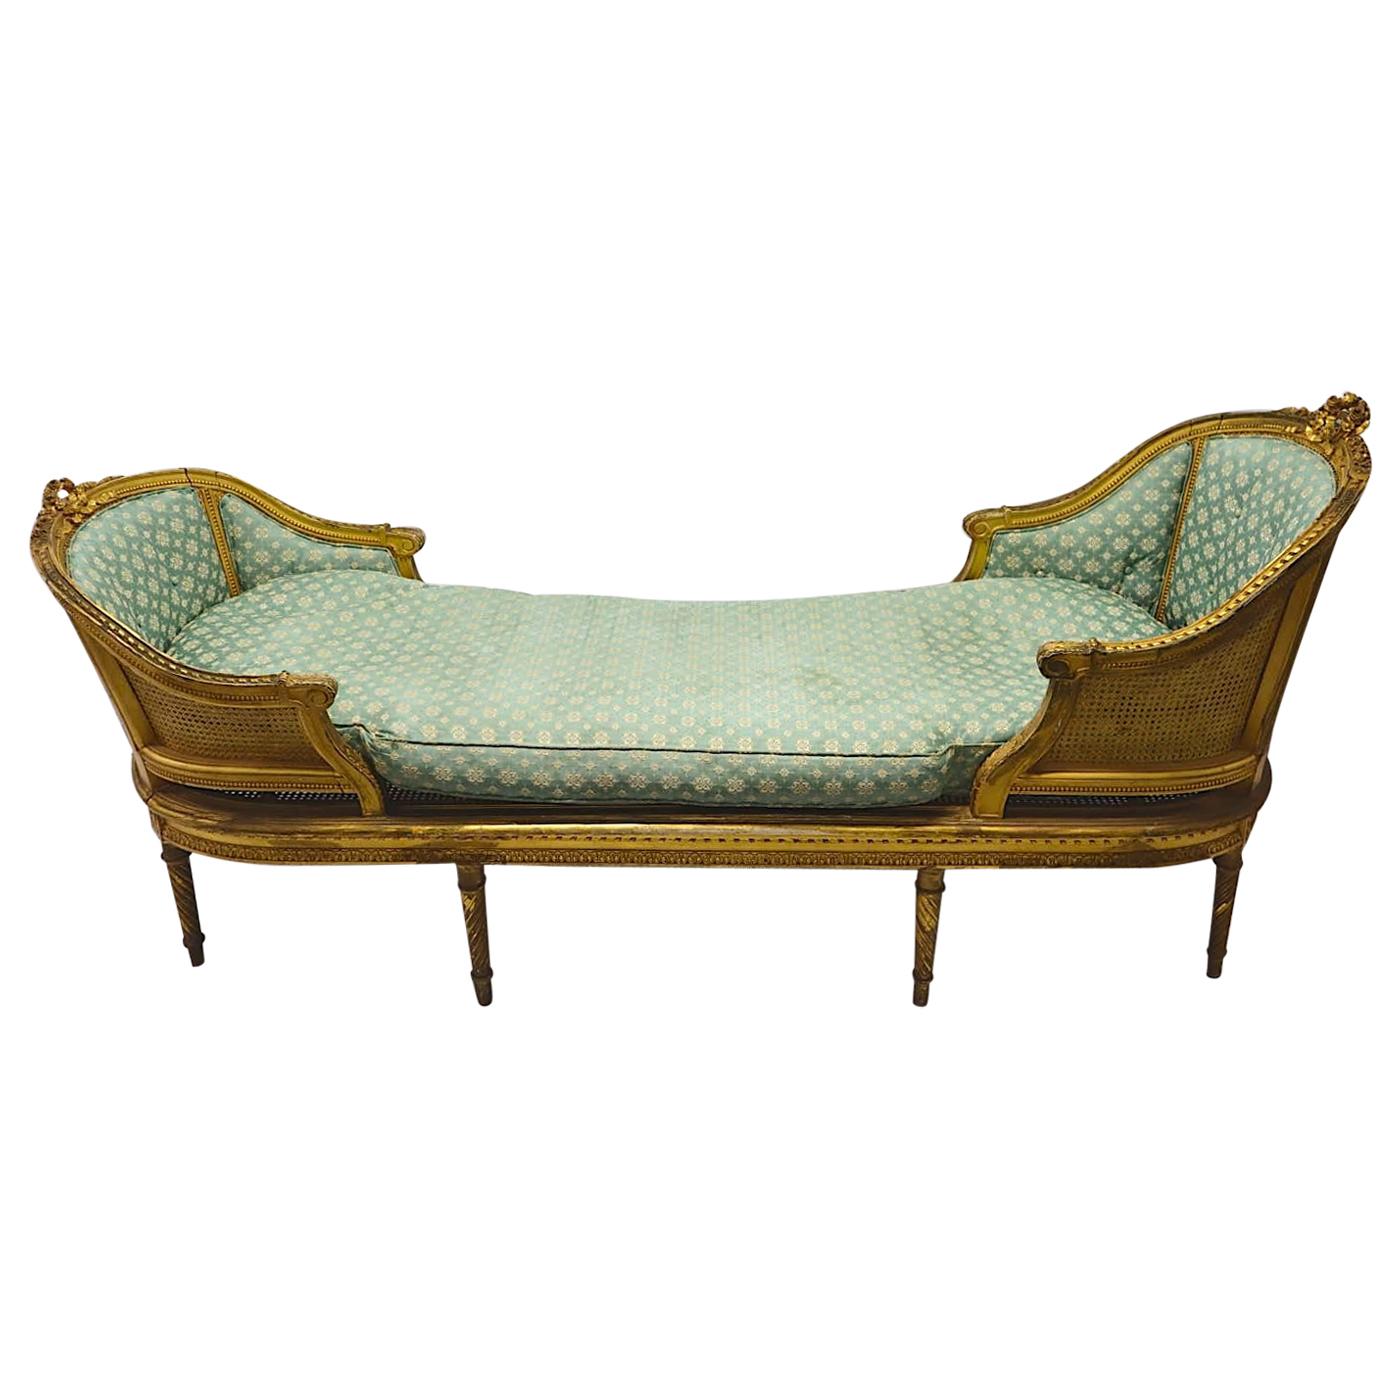 French Luxurious Chaise Longue, circa Mid-18th Century, Louis XIV Style For Sale